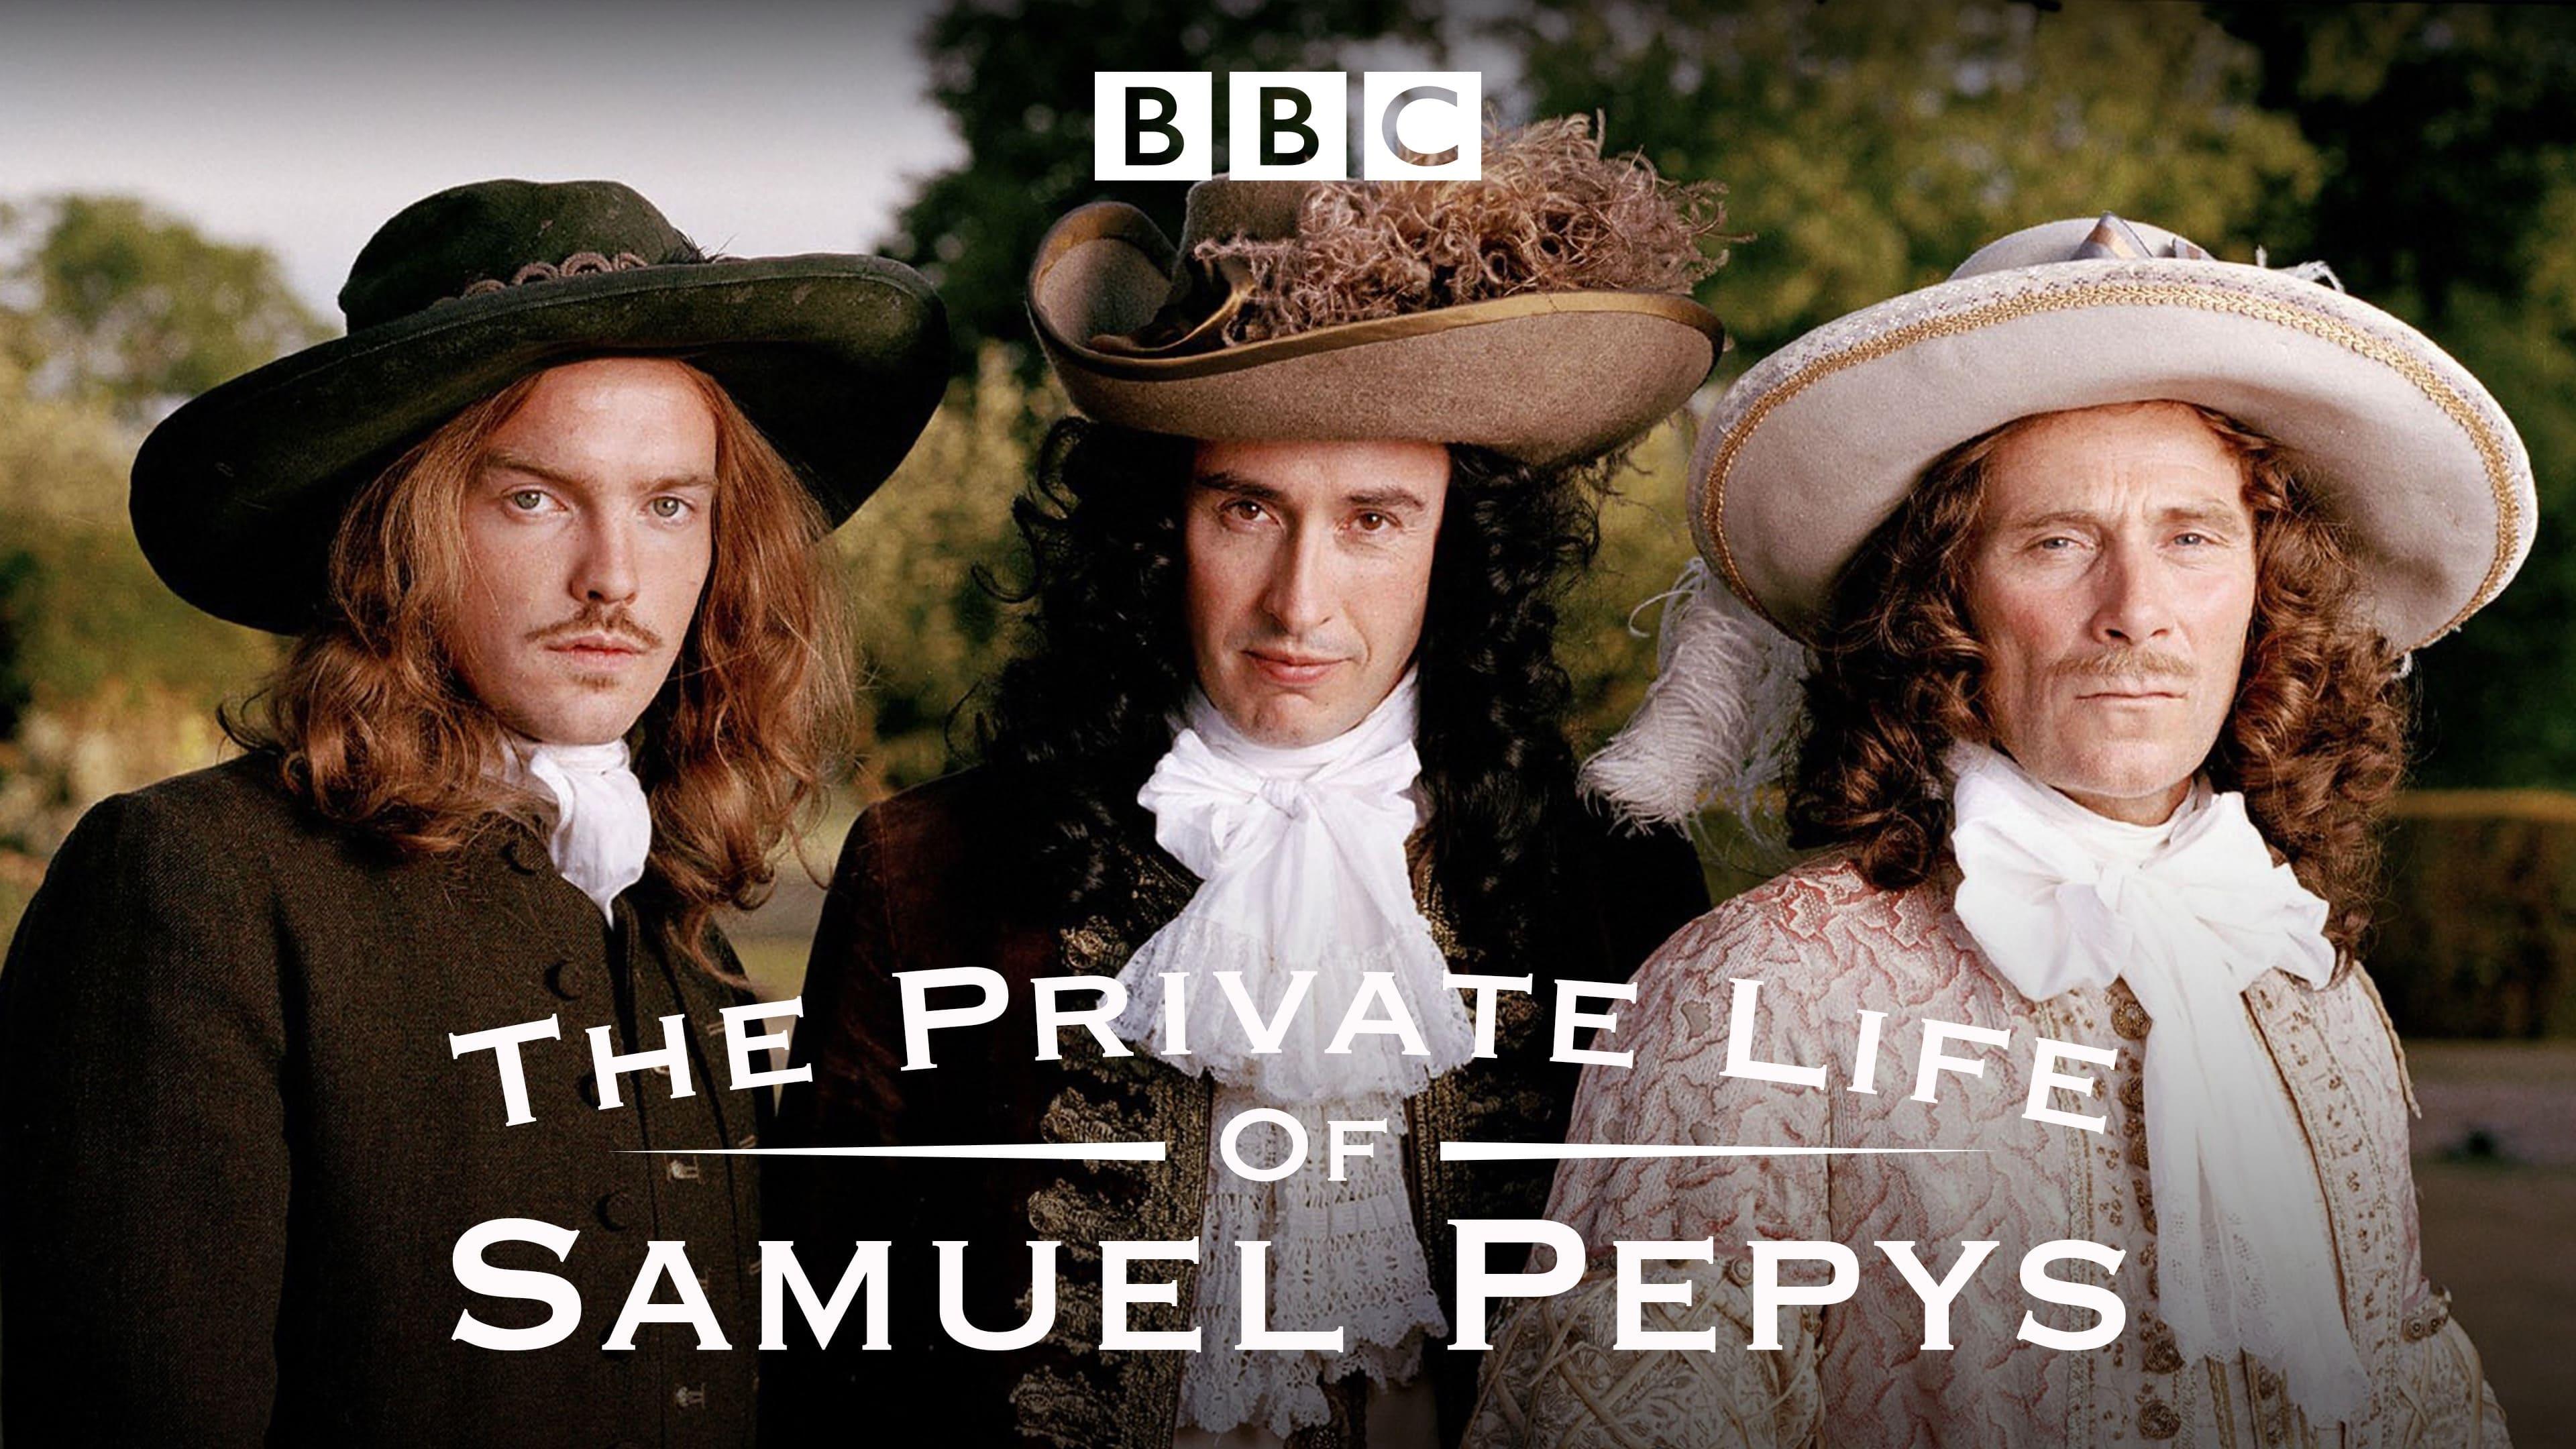 The Private Life of Samuel Pepys backdrop